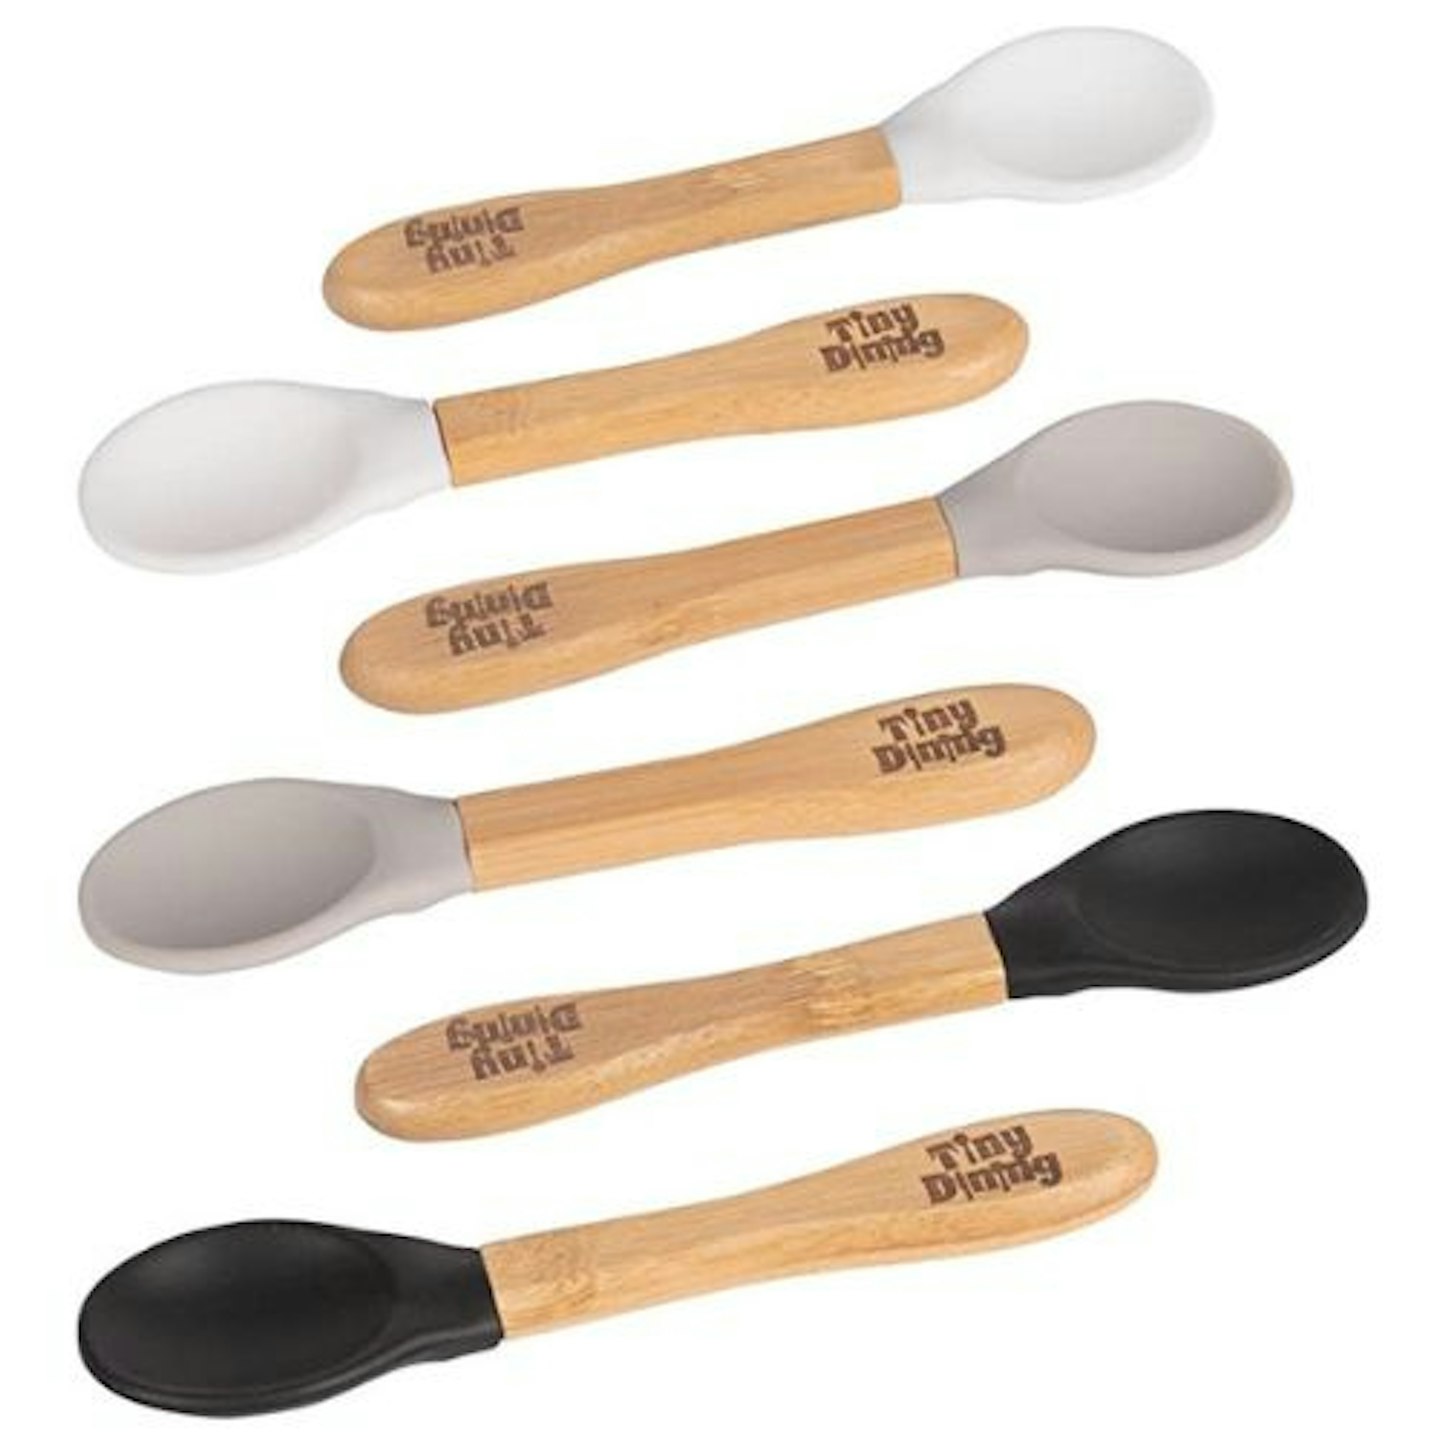 https://images.bauerhosting.com/affiliates/sites/12/2022/11/Tiny-Dining-x6-Childrens-Bamboo-Soft-Tip-Silicone-Spoons.jpg?auto=format&w=1440&q=80